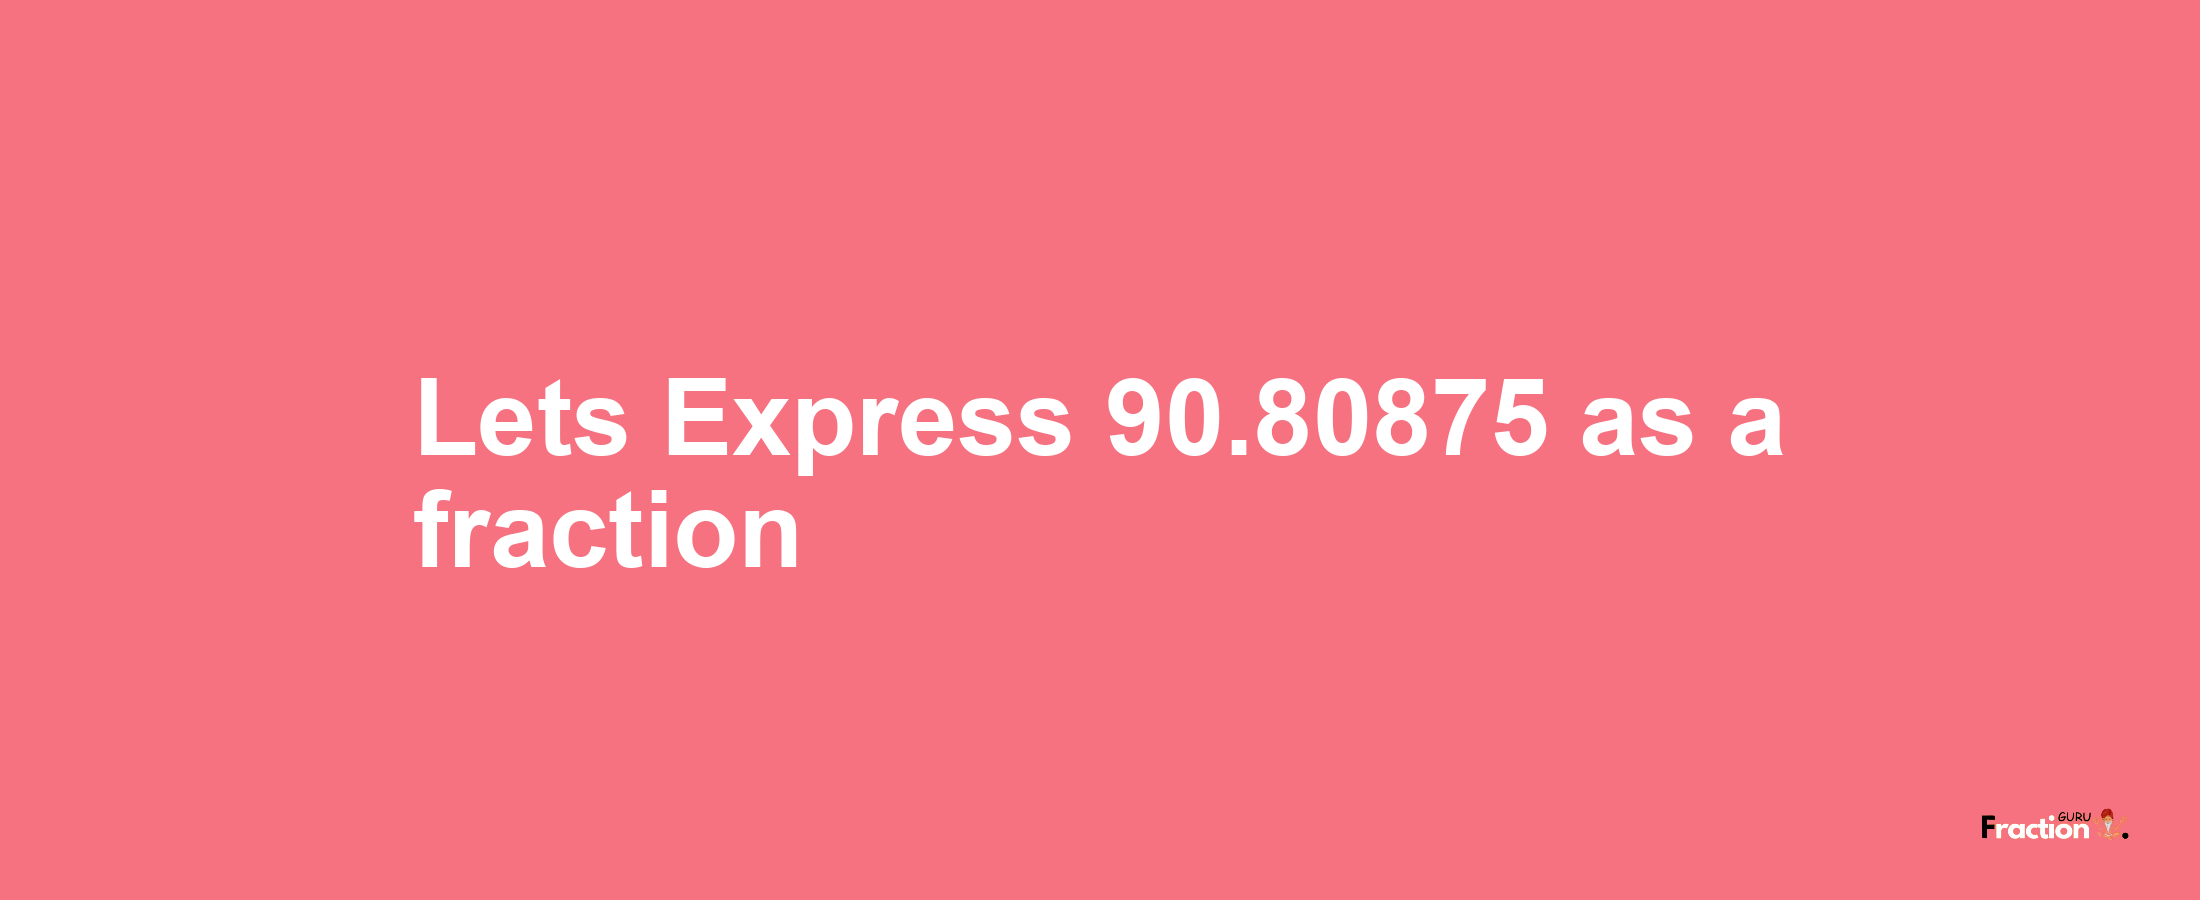 Lets Express 90.80875 as afraction